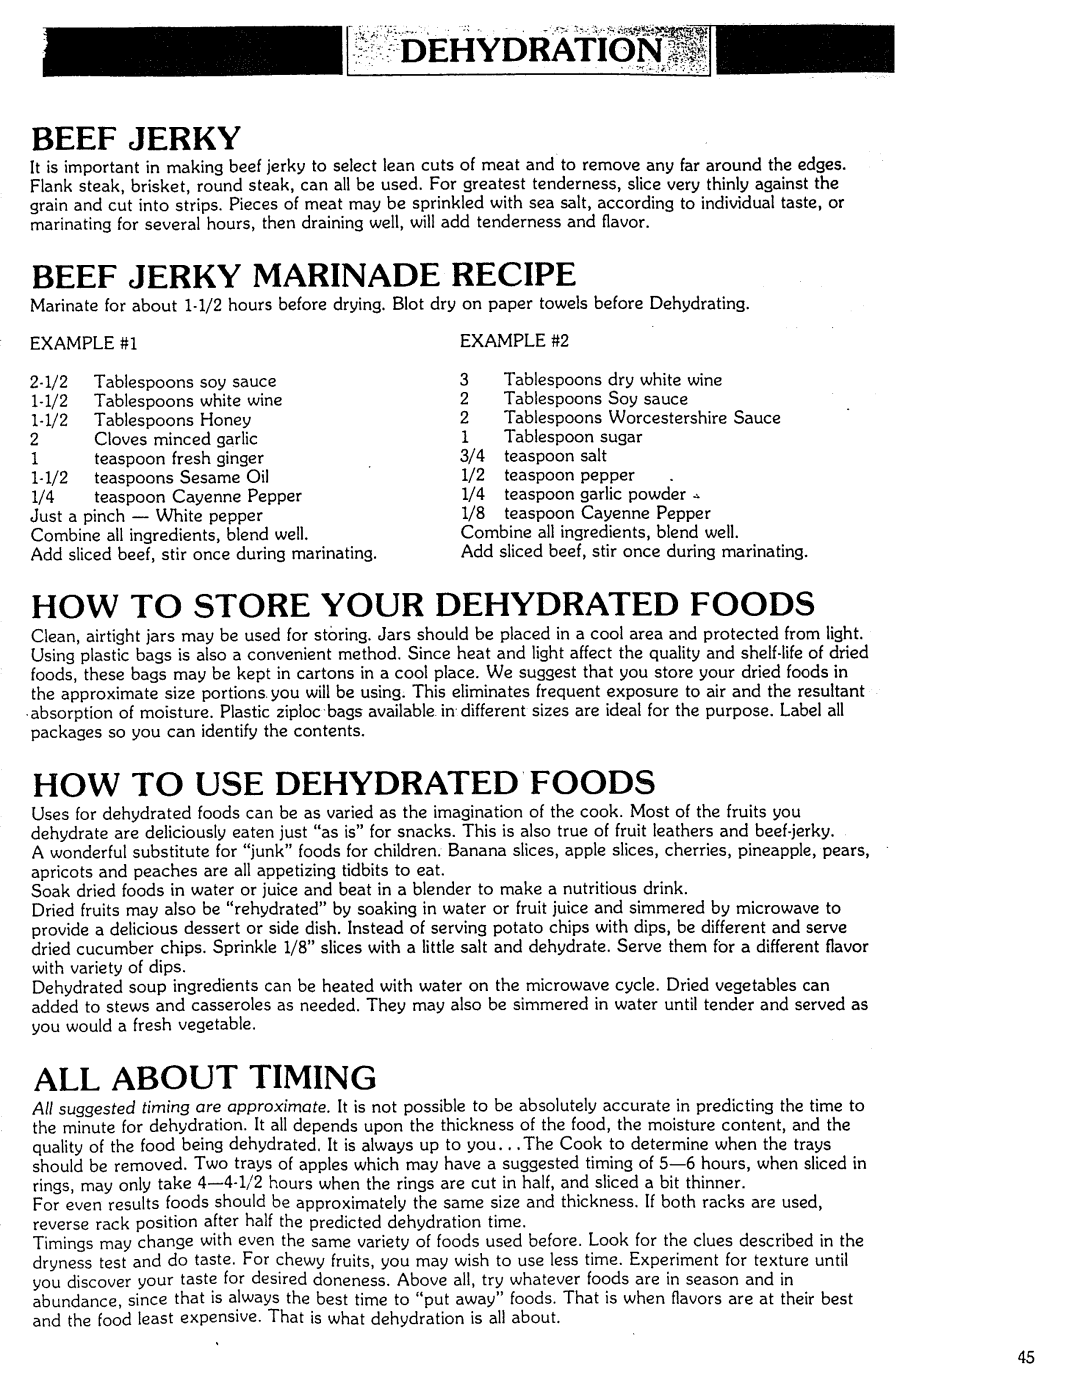 Kenmore Microwave Oven How To Use Dehydratedfoods, Beef Jerky Marinade Recipe, How To Store Your Dehydrated Foods 